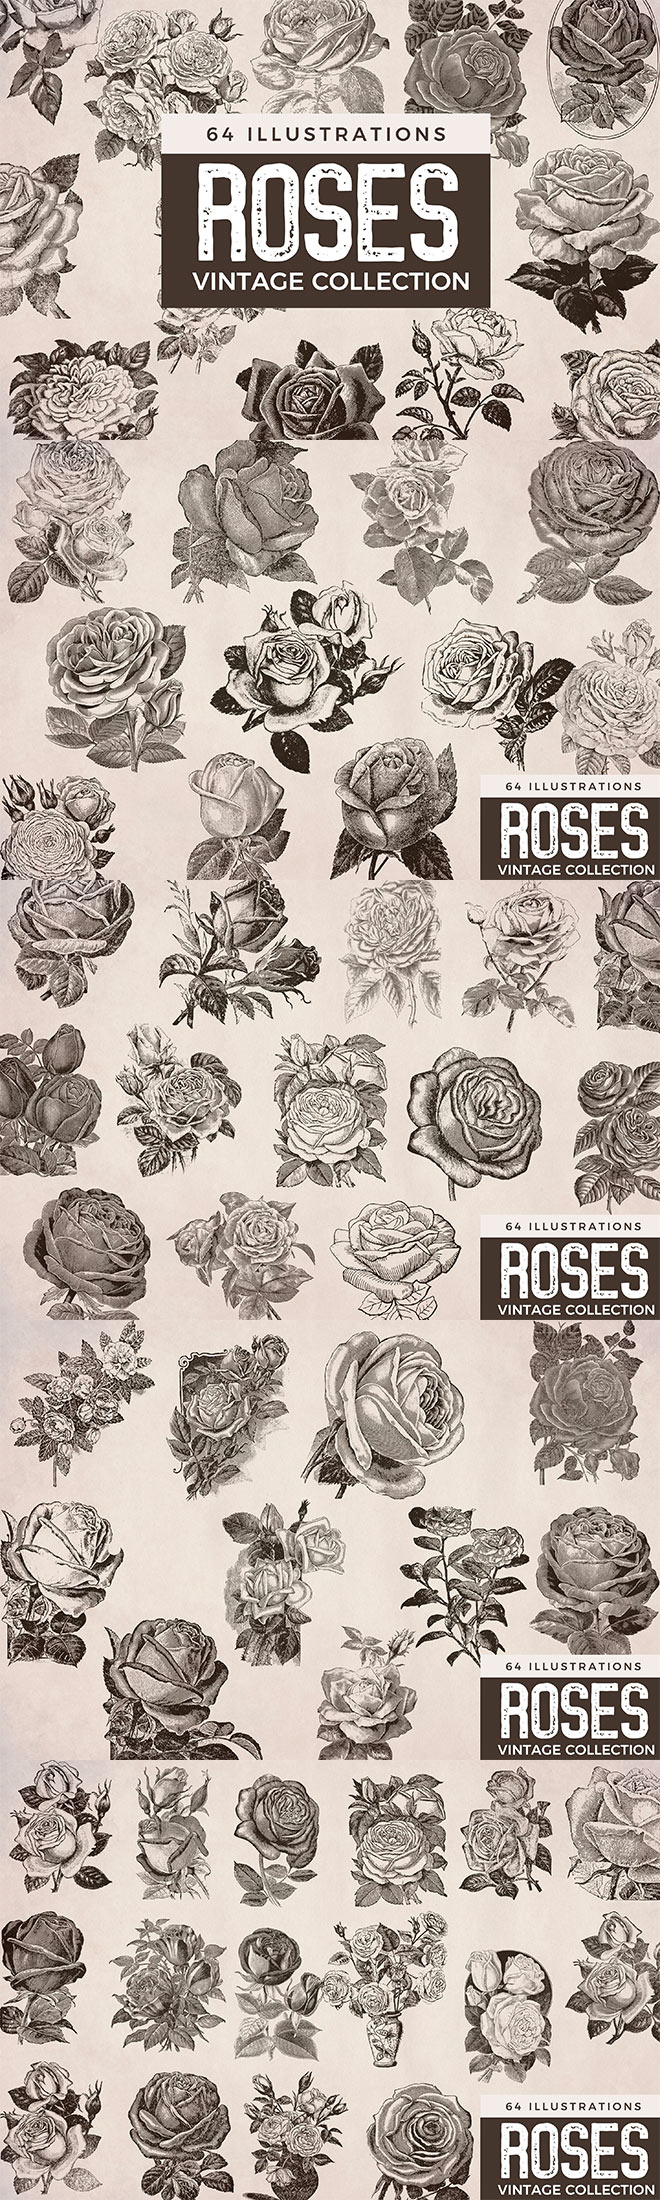 64 Vintage Roses and Flower Illustrations for Premium Members